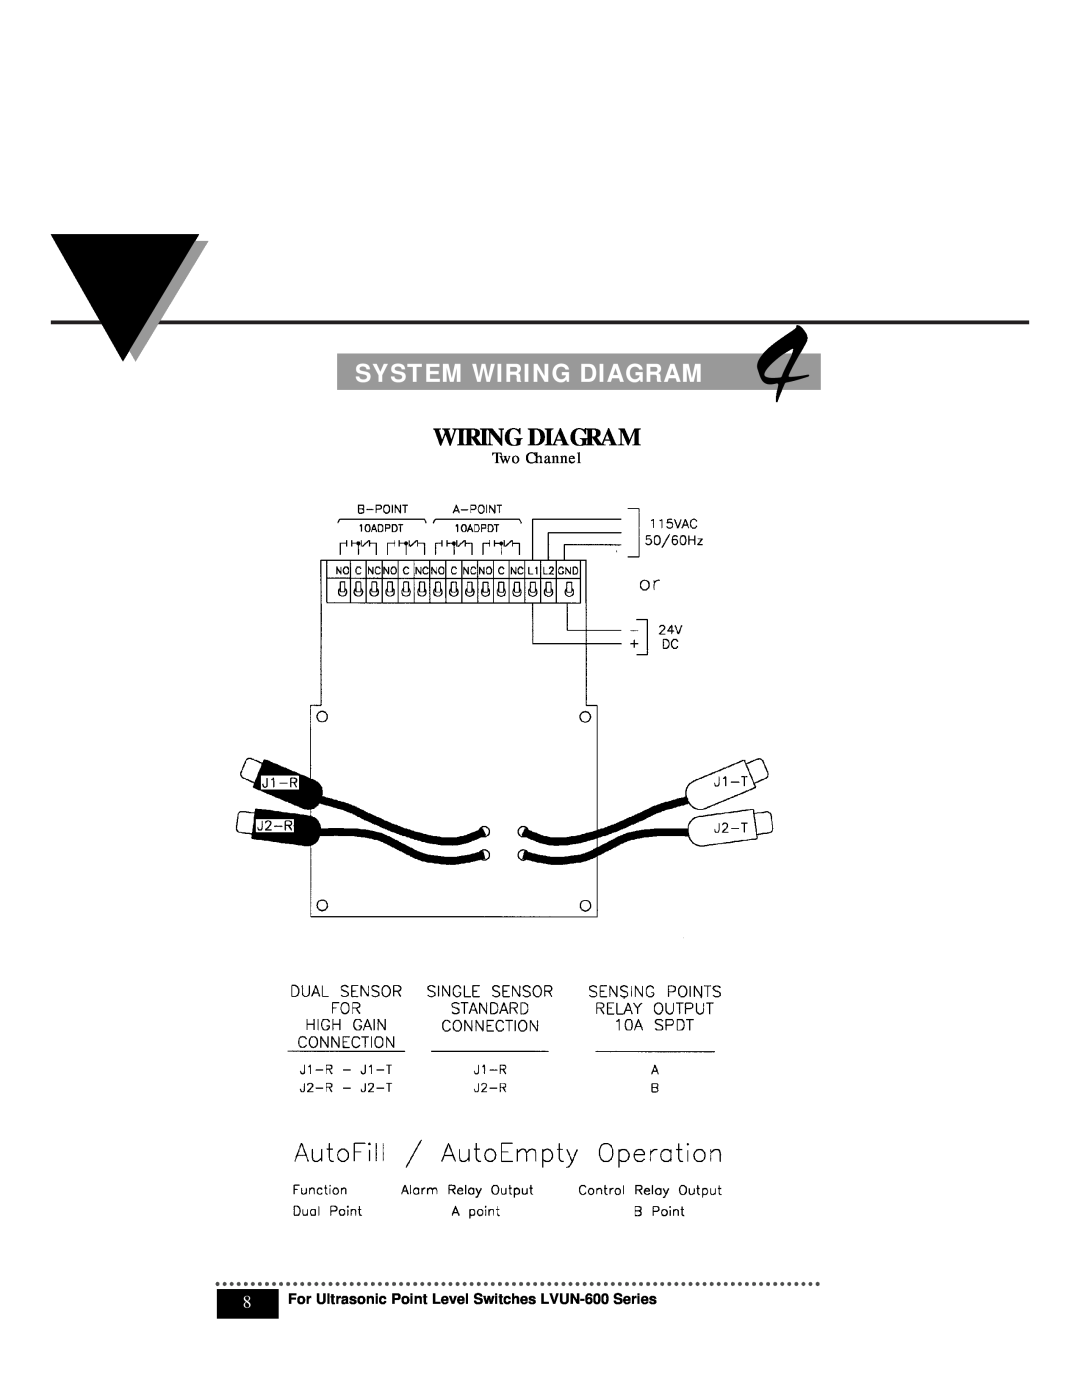 Omega Vehicle Security manual System Wiring Diagram, For Ultrasonic Point Level Switches LVUN-600 Series 